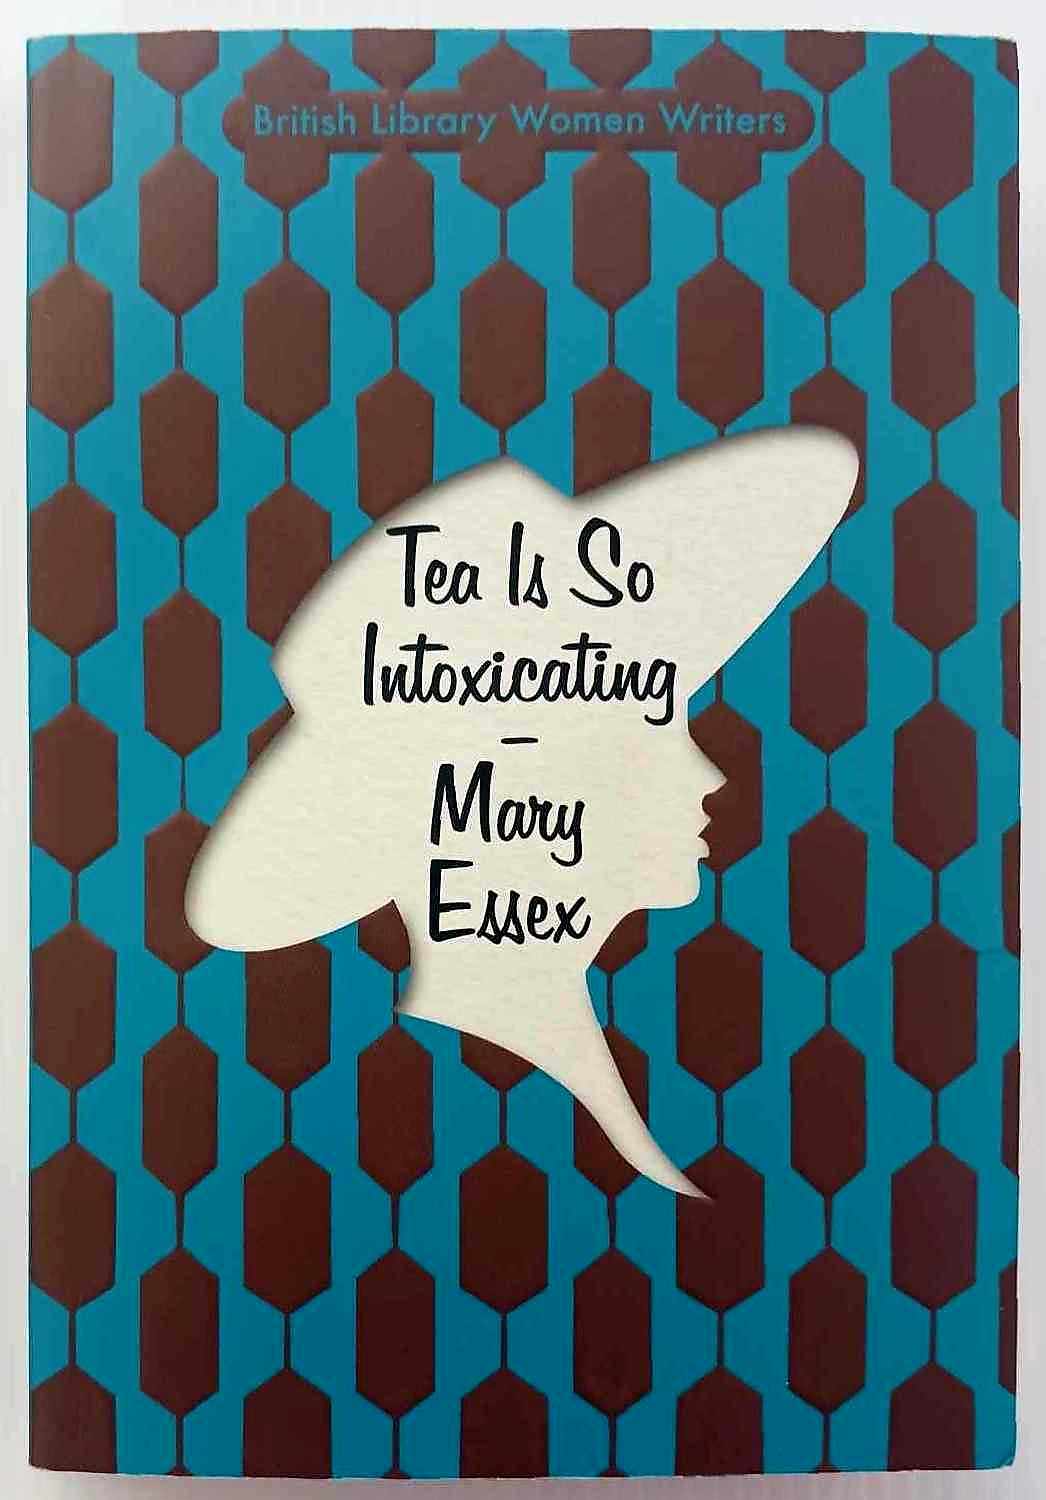 TEA IS SO INTOXICATING - Mary Essex